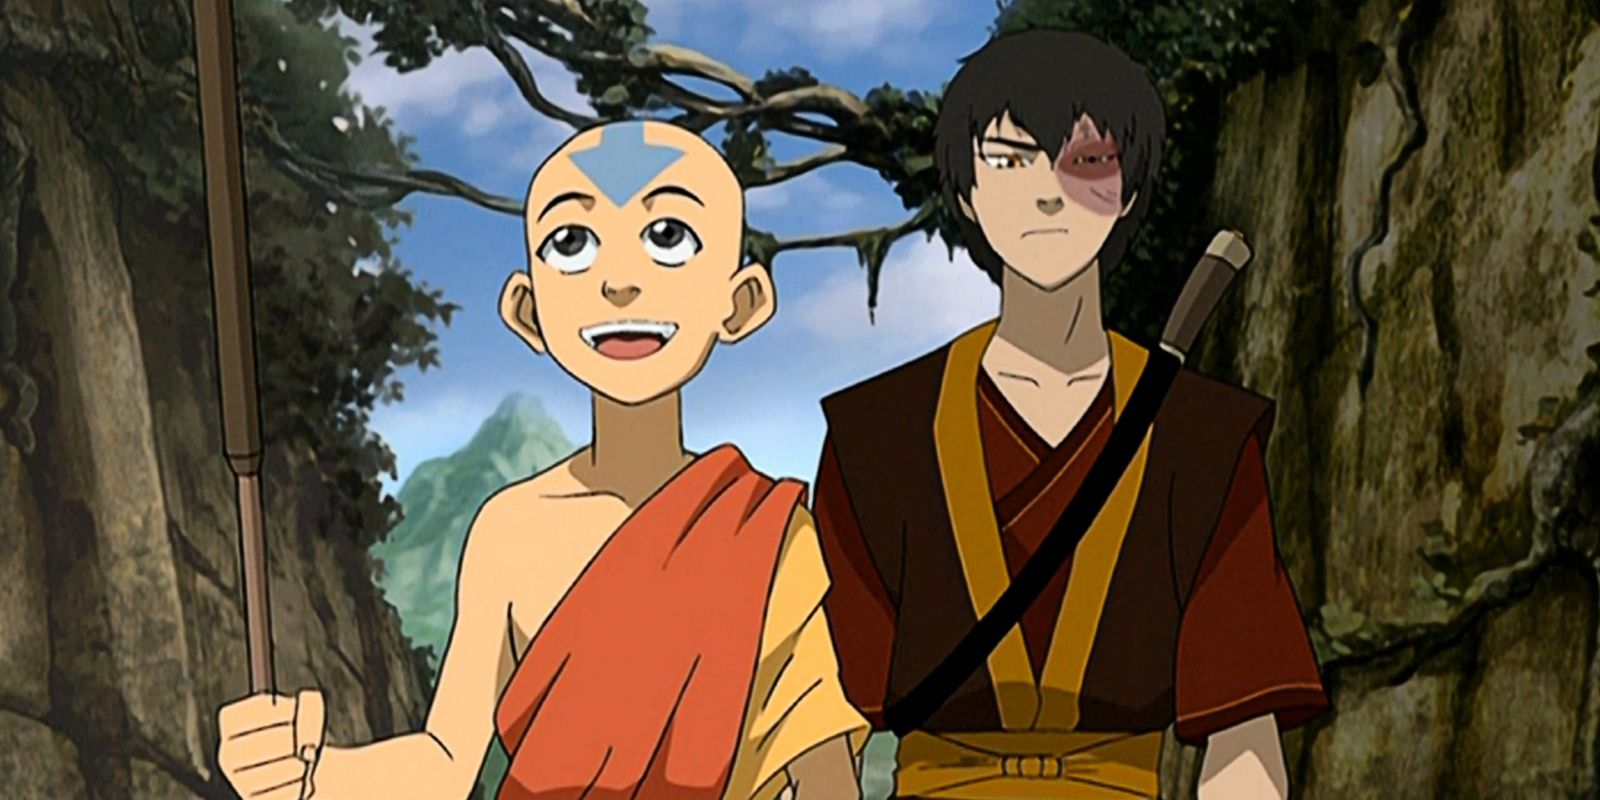 REDIRECT Avatar The Last Airbender Season 3 Episodes 14 15 16 and 17  Reaction  YouTube